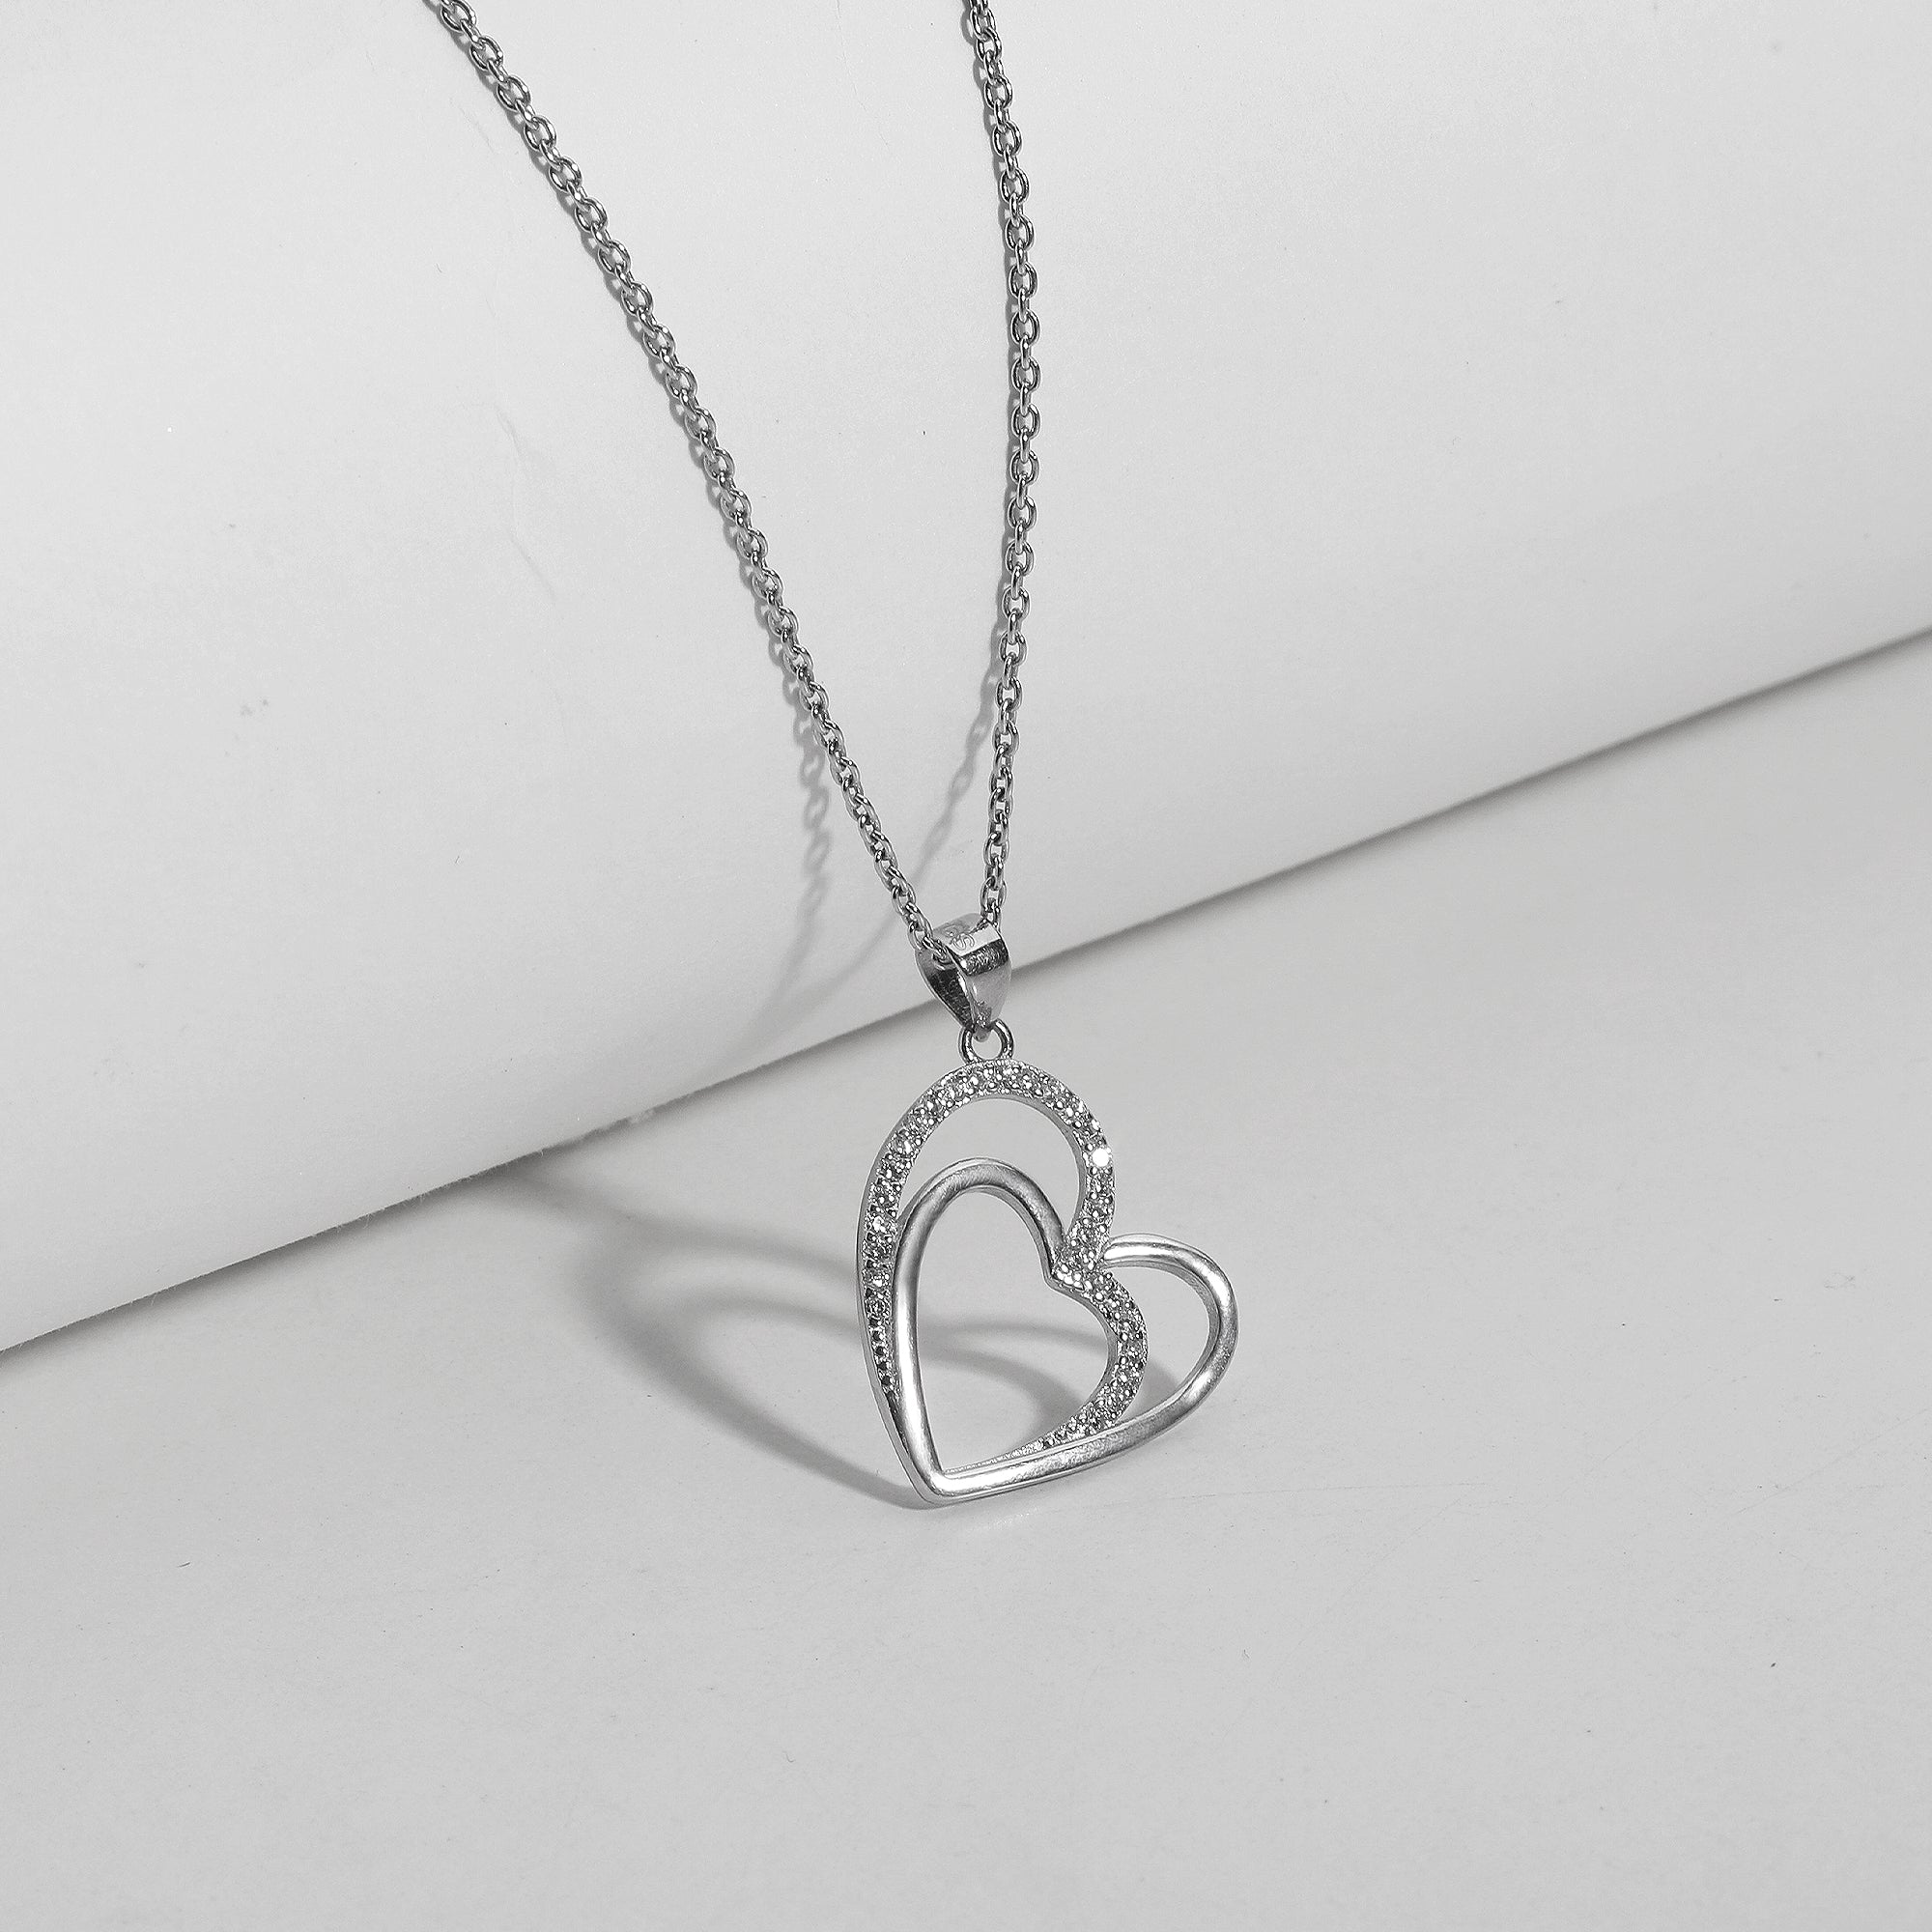 CFXNMZGR Necklaces Pendants For Women Double Heart Diamond Pendant Necklace  For Women Pendant Women'S Necklaces Birthday Gift For Mom Women Wife -  Walmart.com